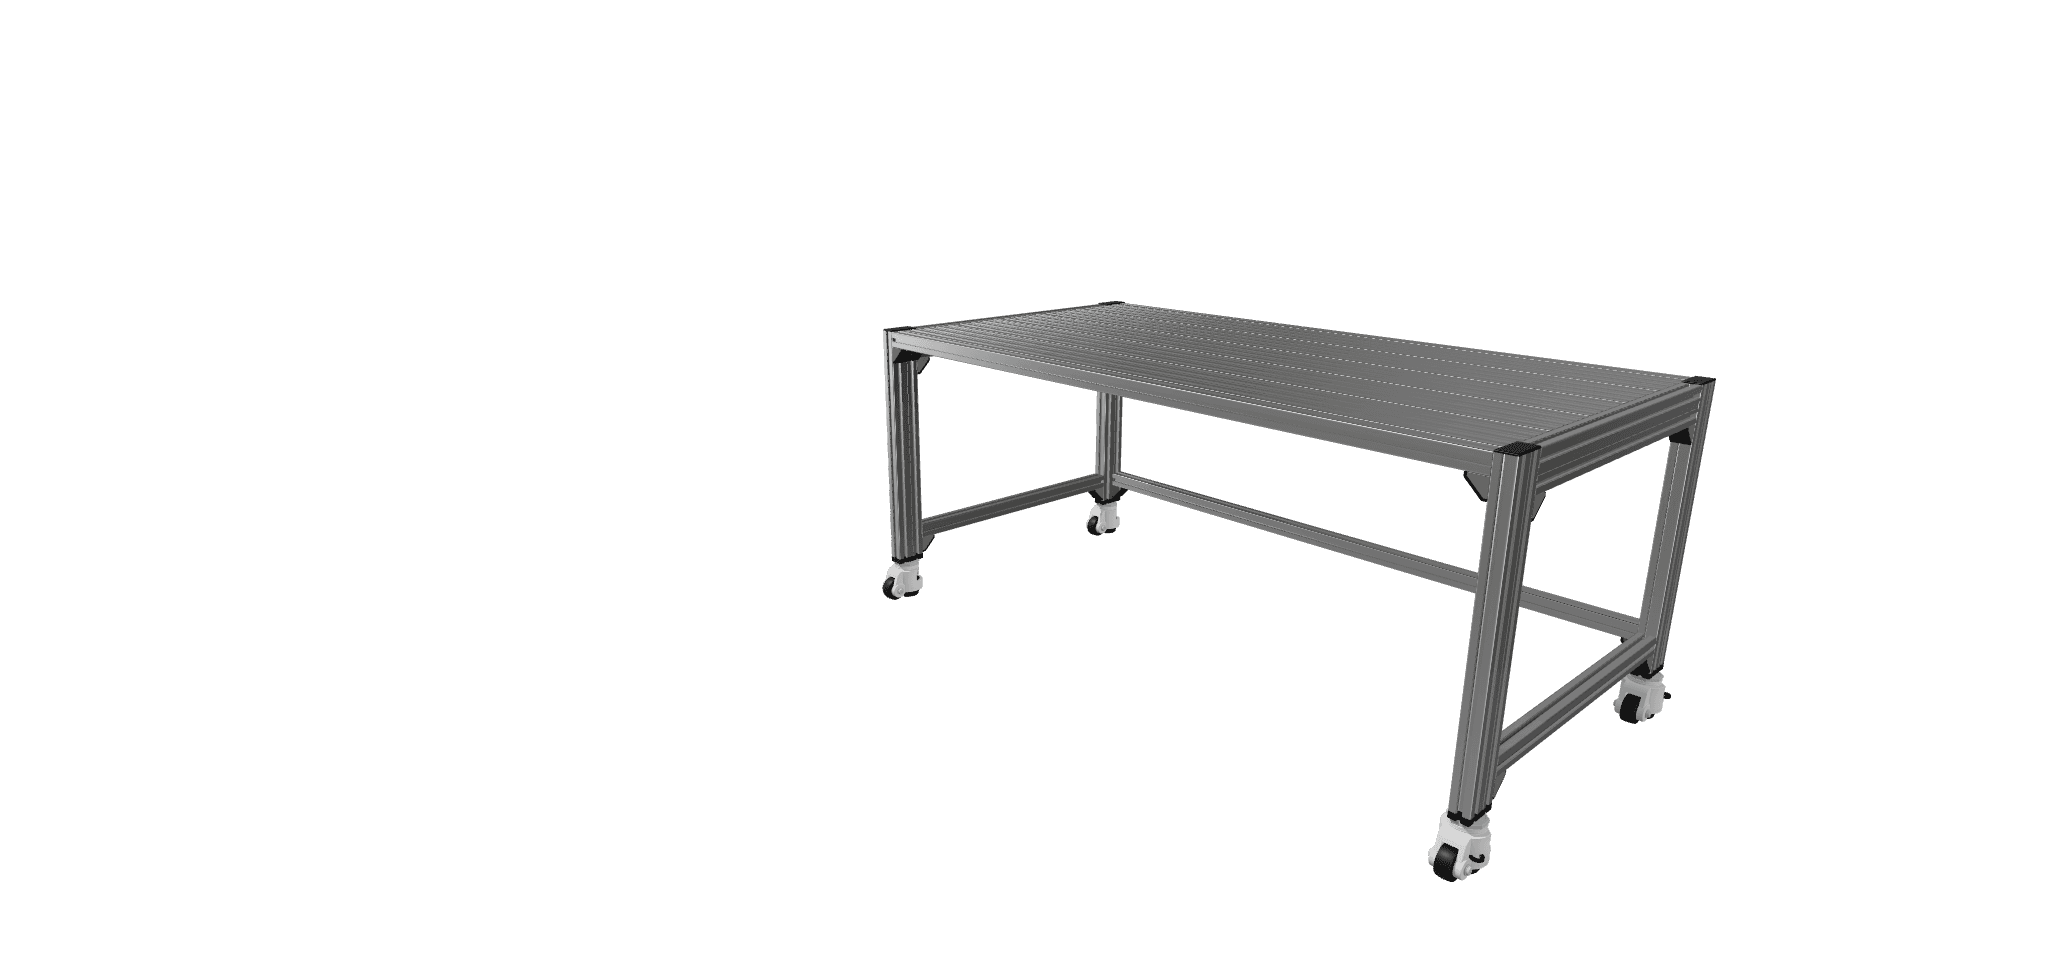 Flexible table for cobots